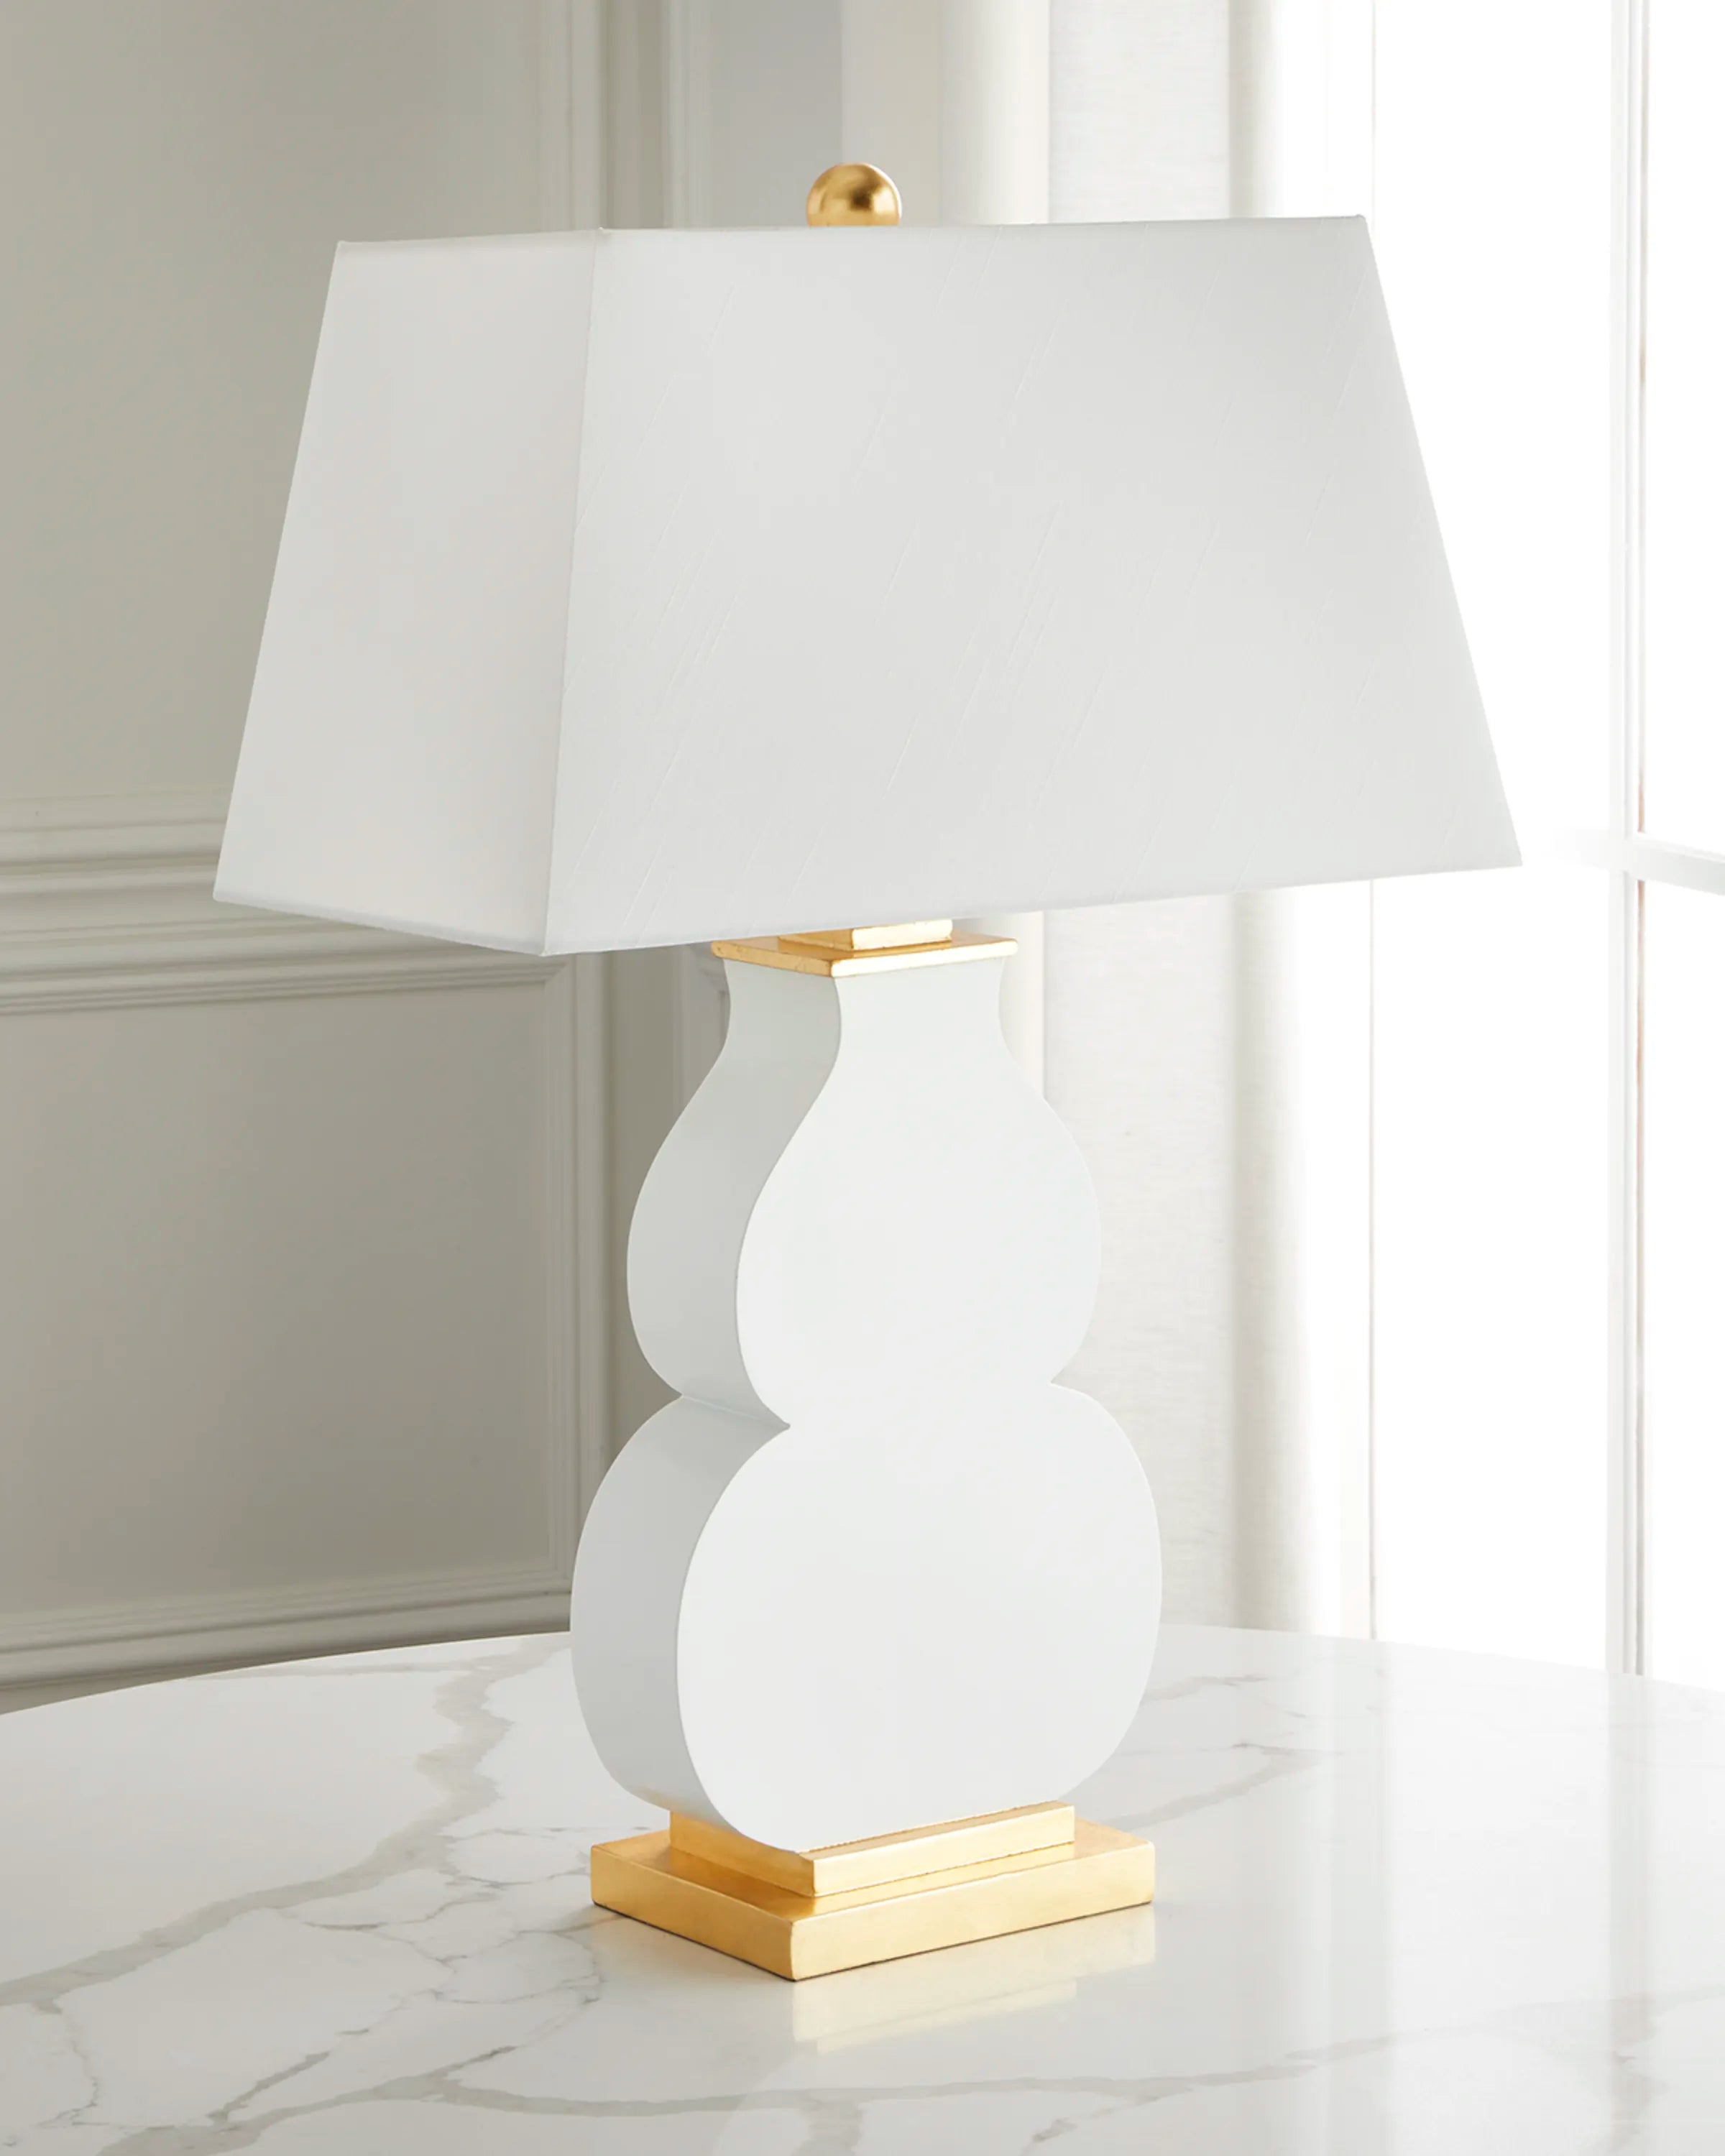 Haley Gloss White Table Lamp with Gold Accents